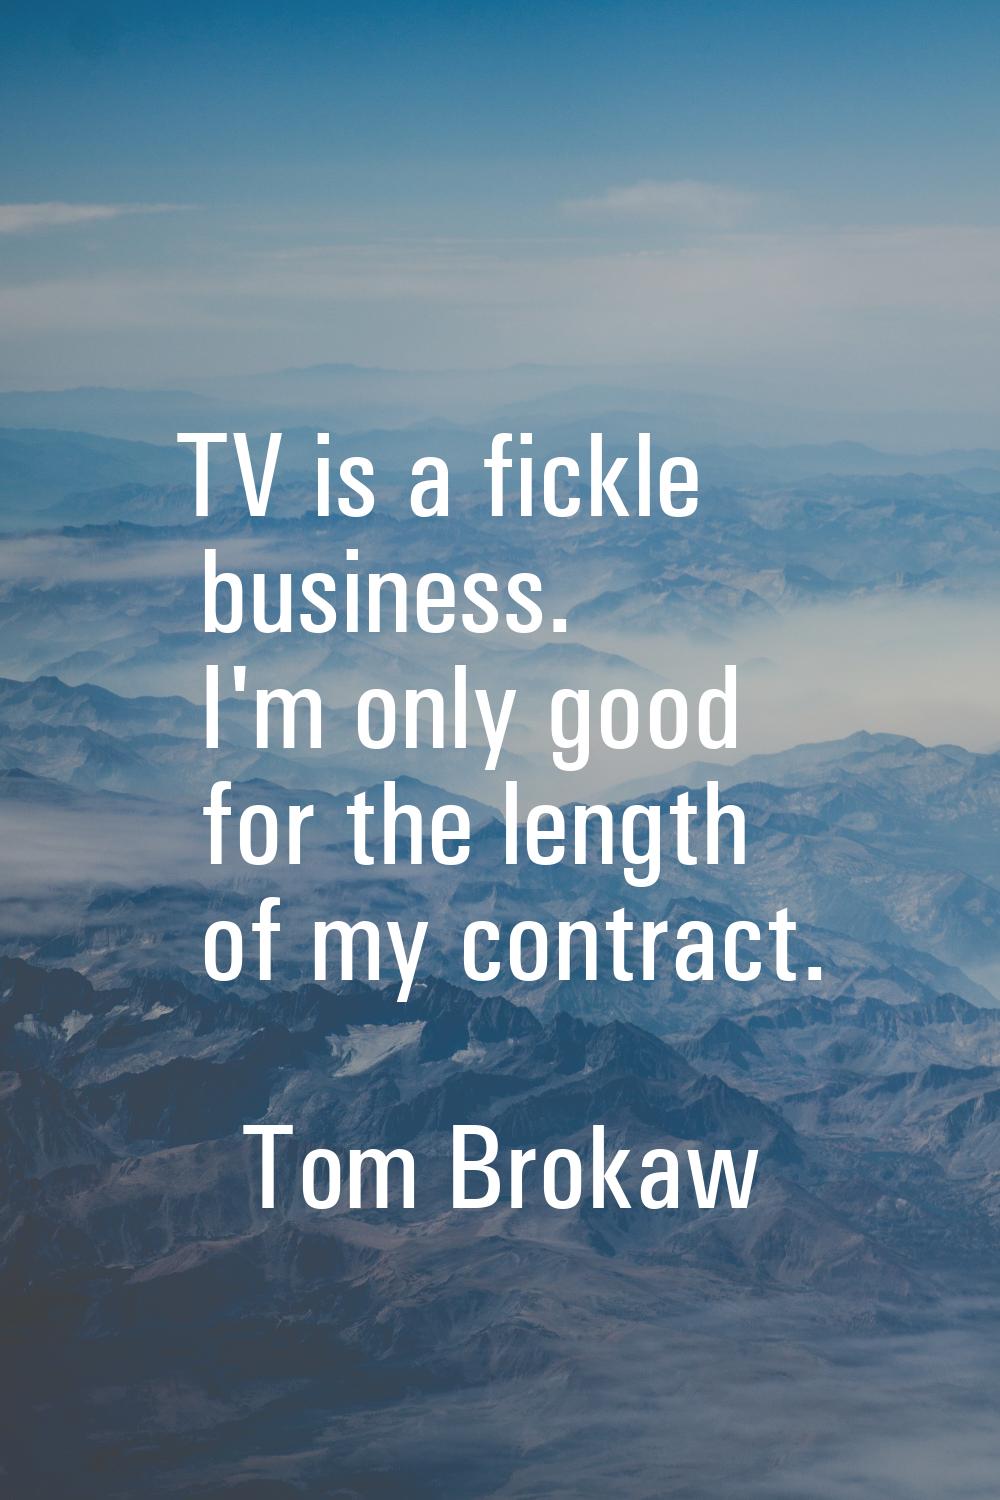 TV is a fickle business. I'm only good for the length of my contract.